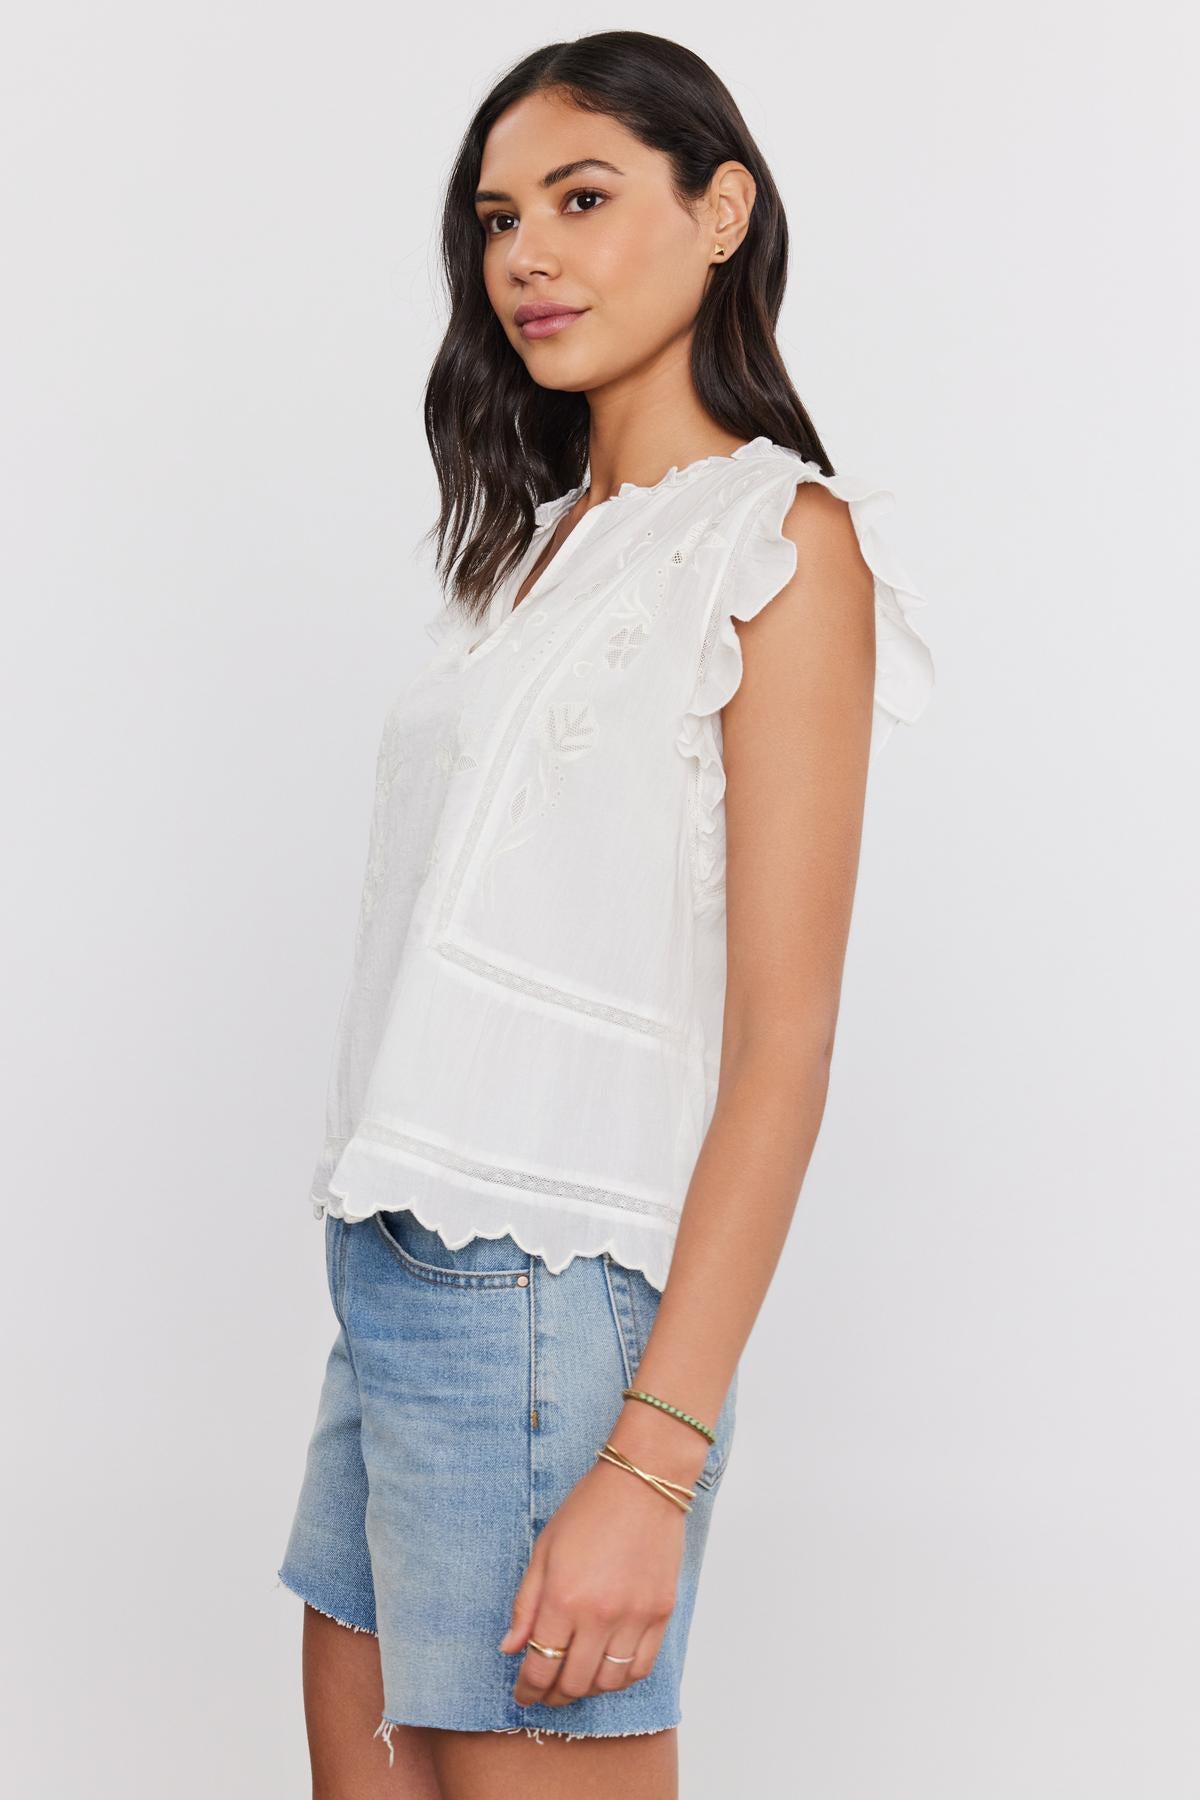   A woman wearing a white CHARLENE TOP with cotton embroidery and denim shorts, standing with a slight smile, facing towards the camera. Brand: Velvet by Graham & Spencer 